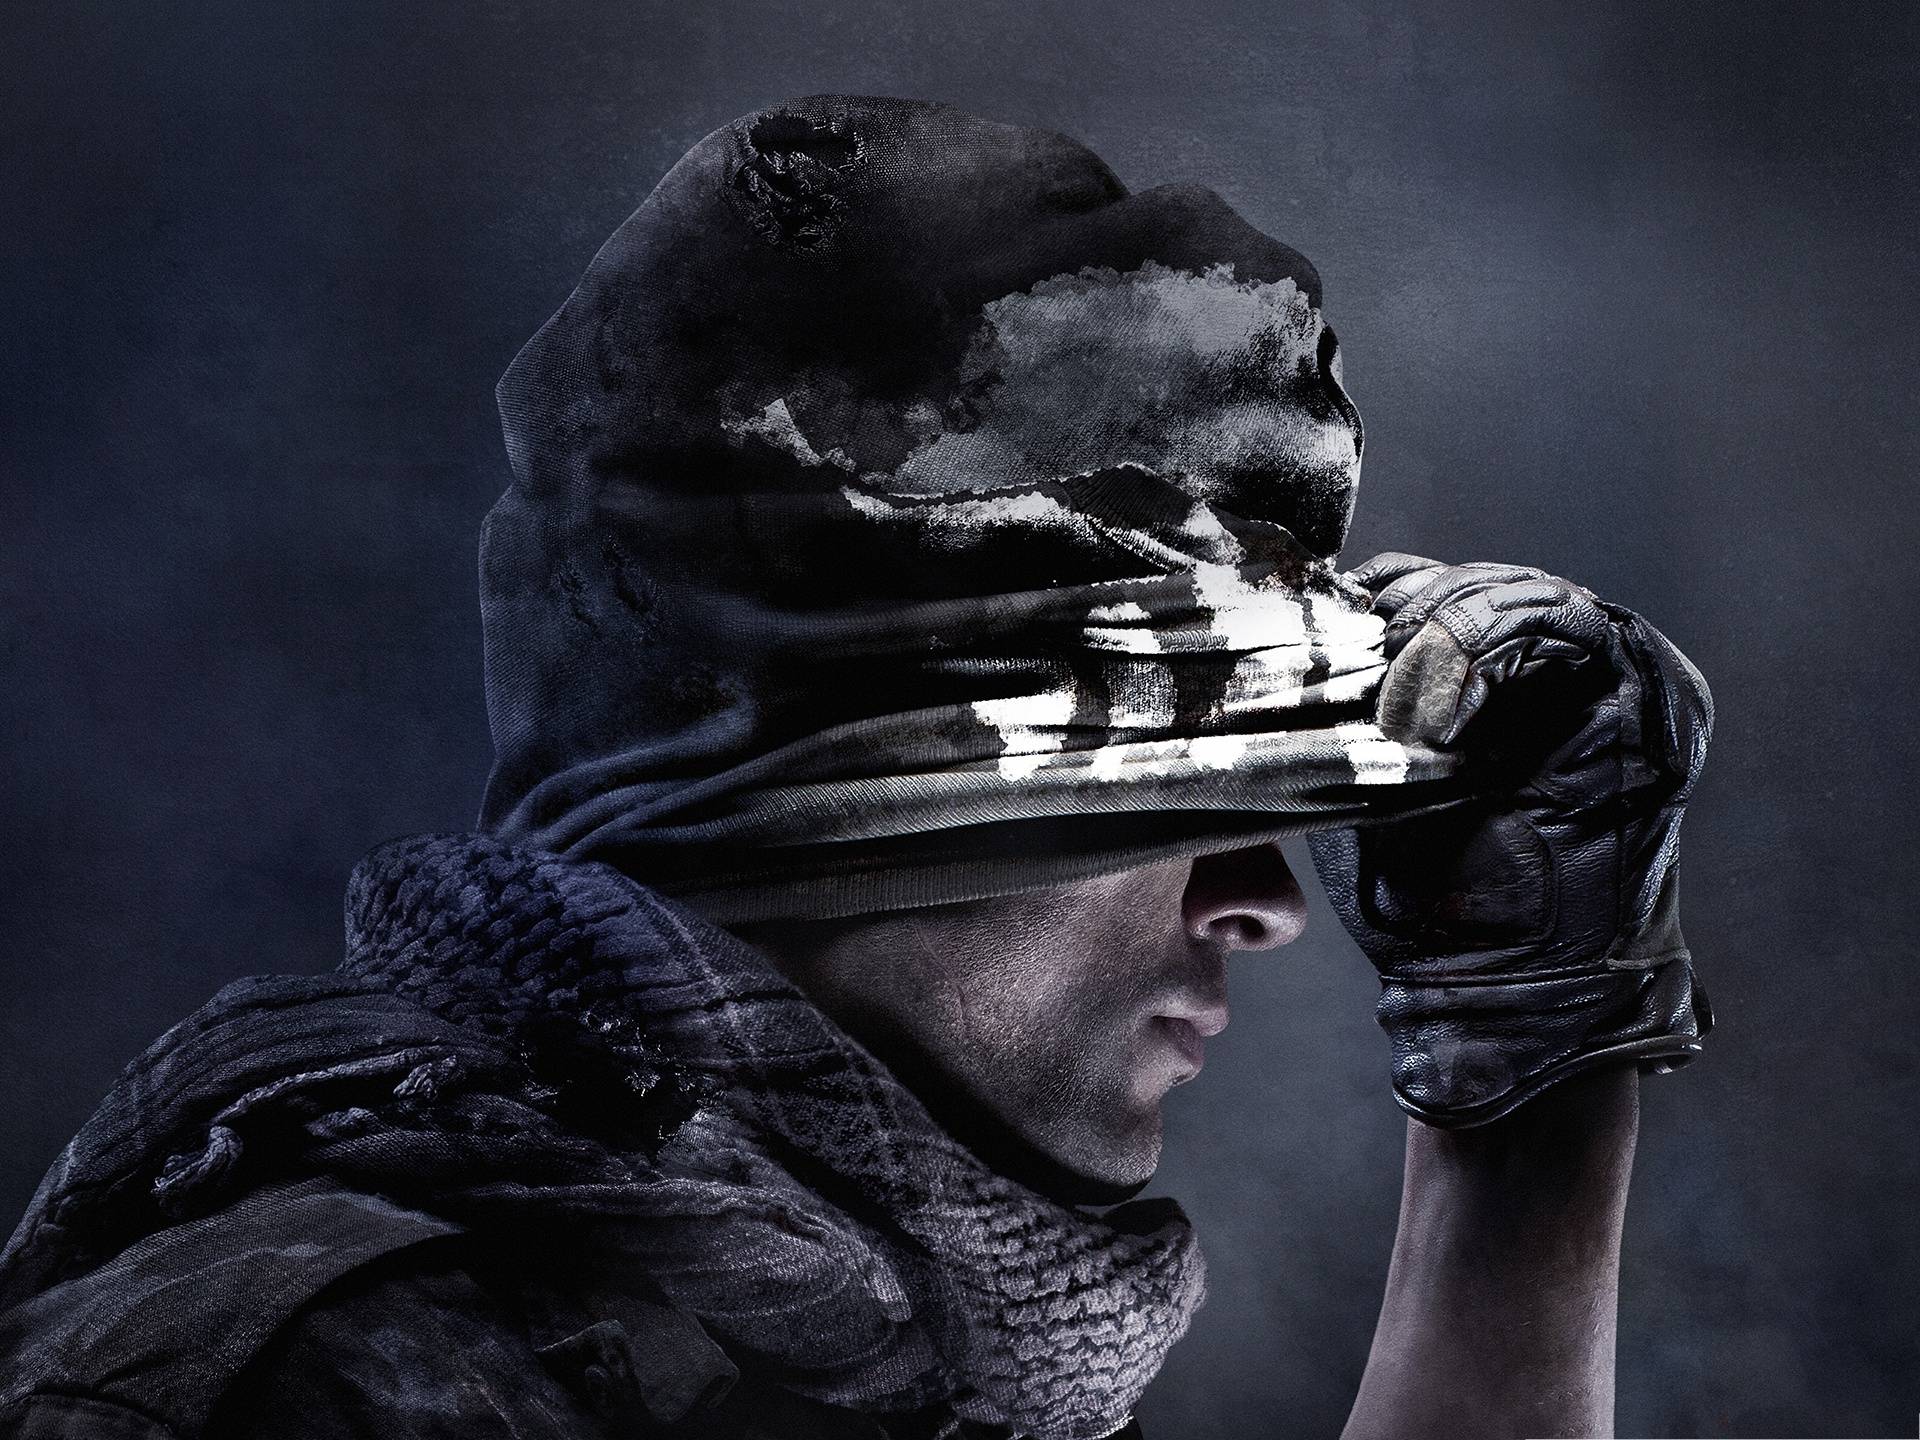 Best Games Wallpaper, Call of Duty Ghosts, Dangerous Cool Guy